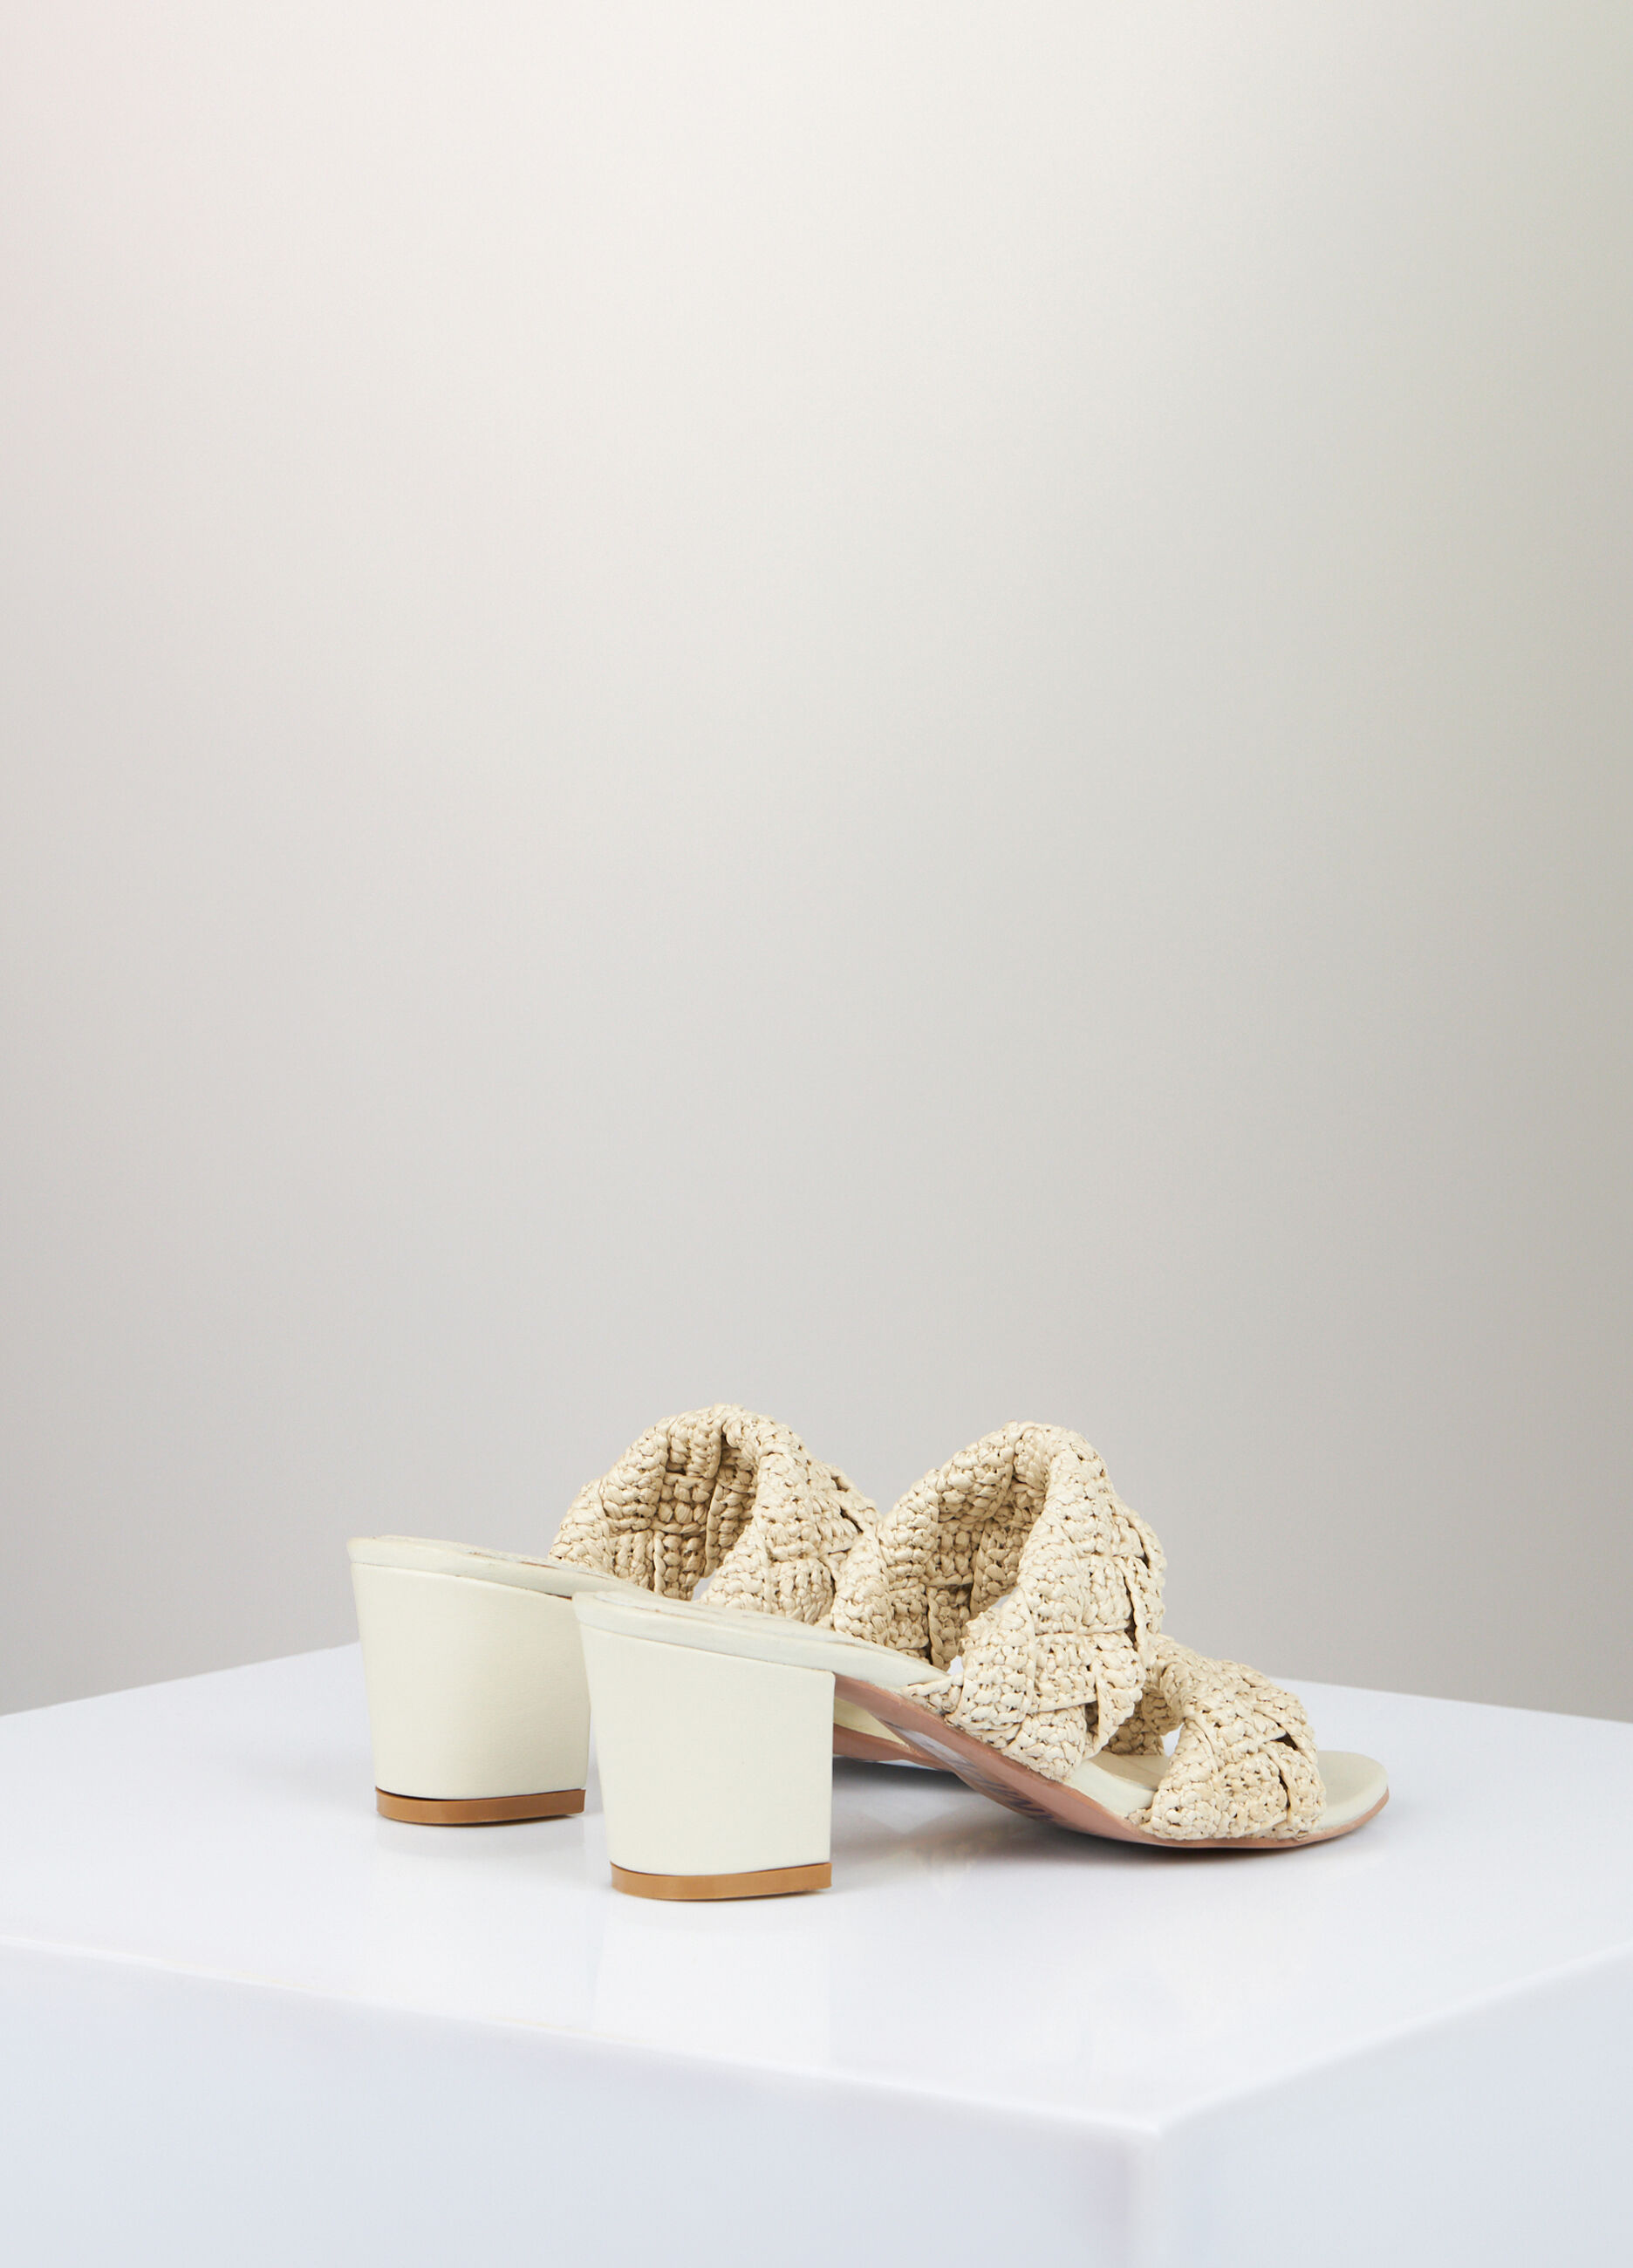 Band sandals in leather and raffia